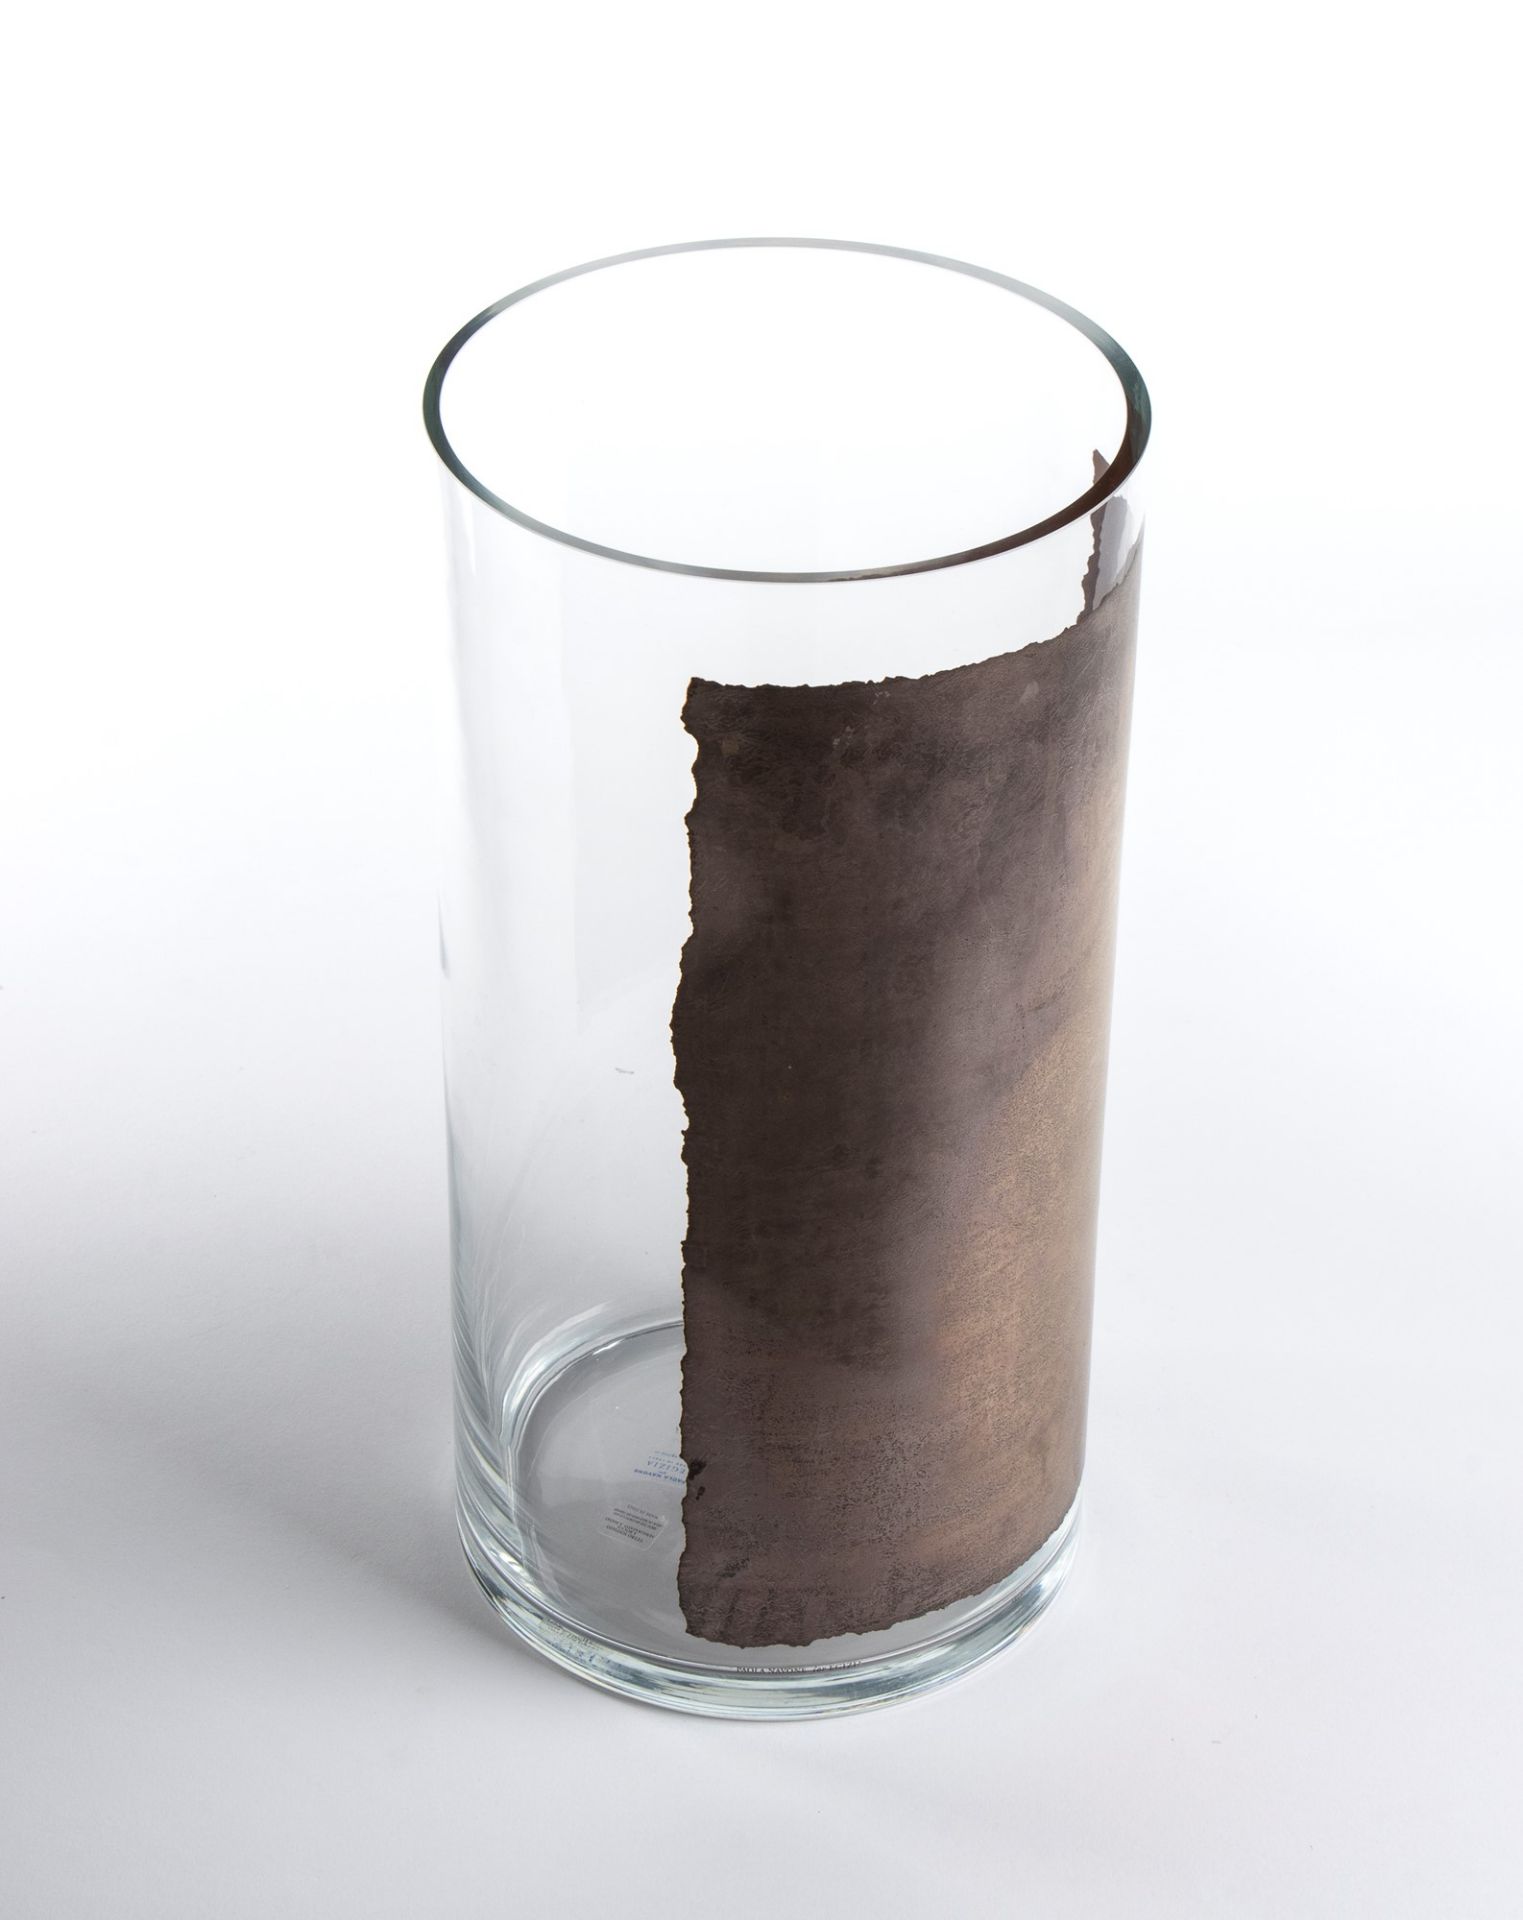 Paola Navone Glass vase hand blown and silk-screened glass and silver - Image 6 of 11